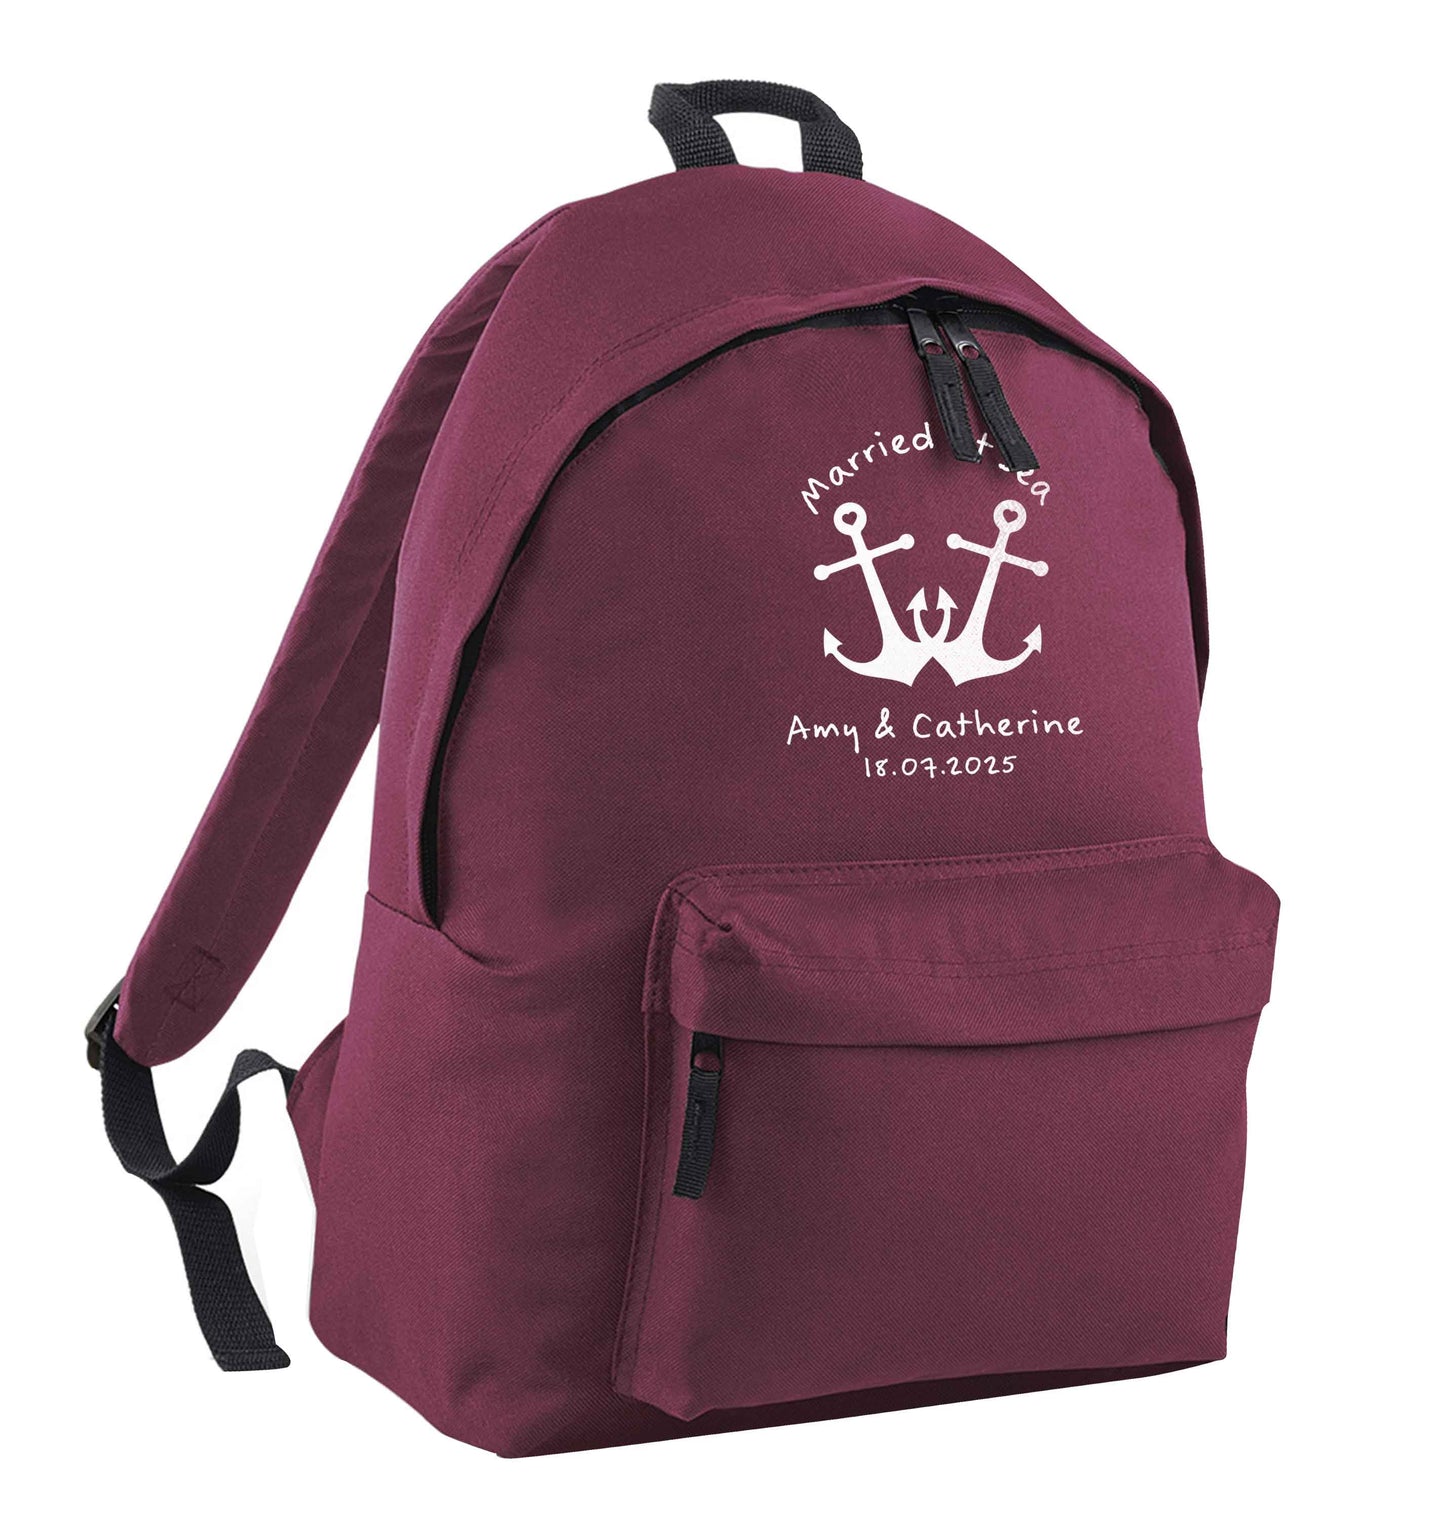 Married at sea pink anchors maroon adults backpack